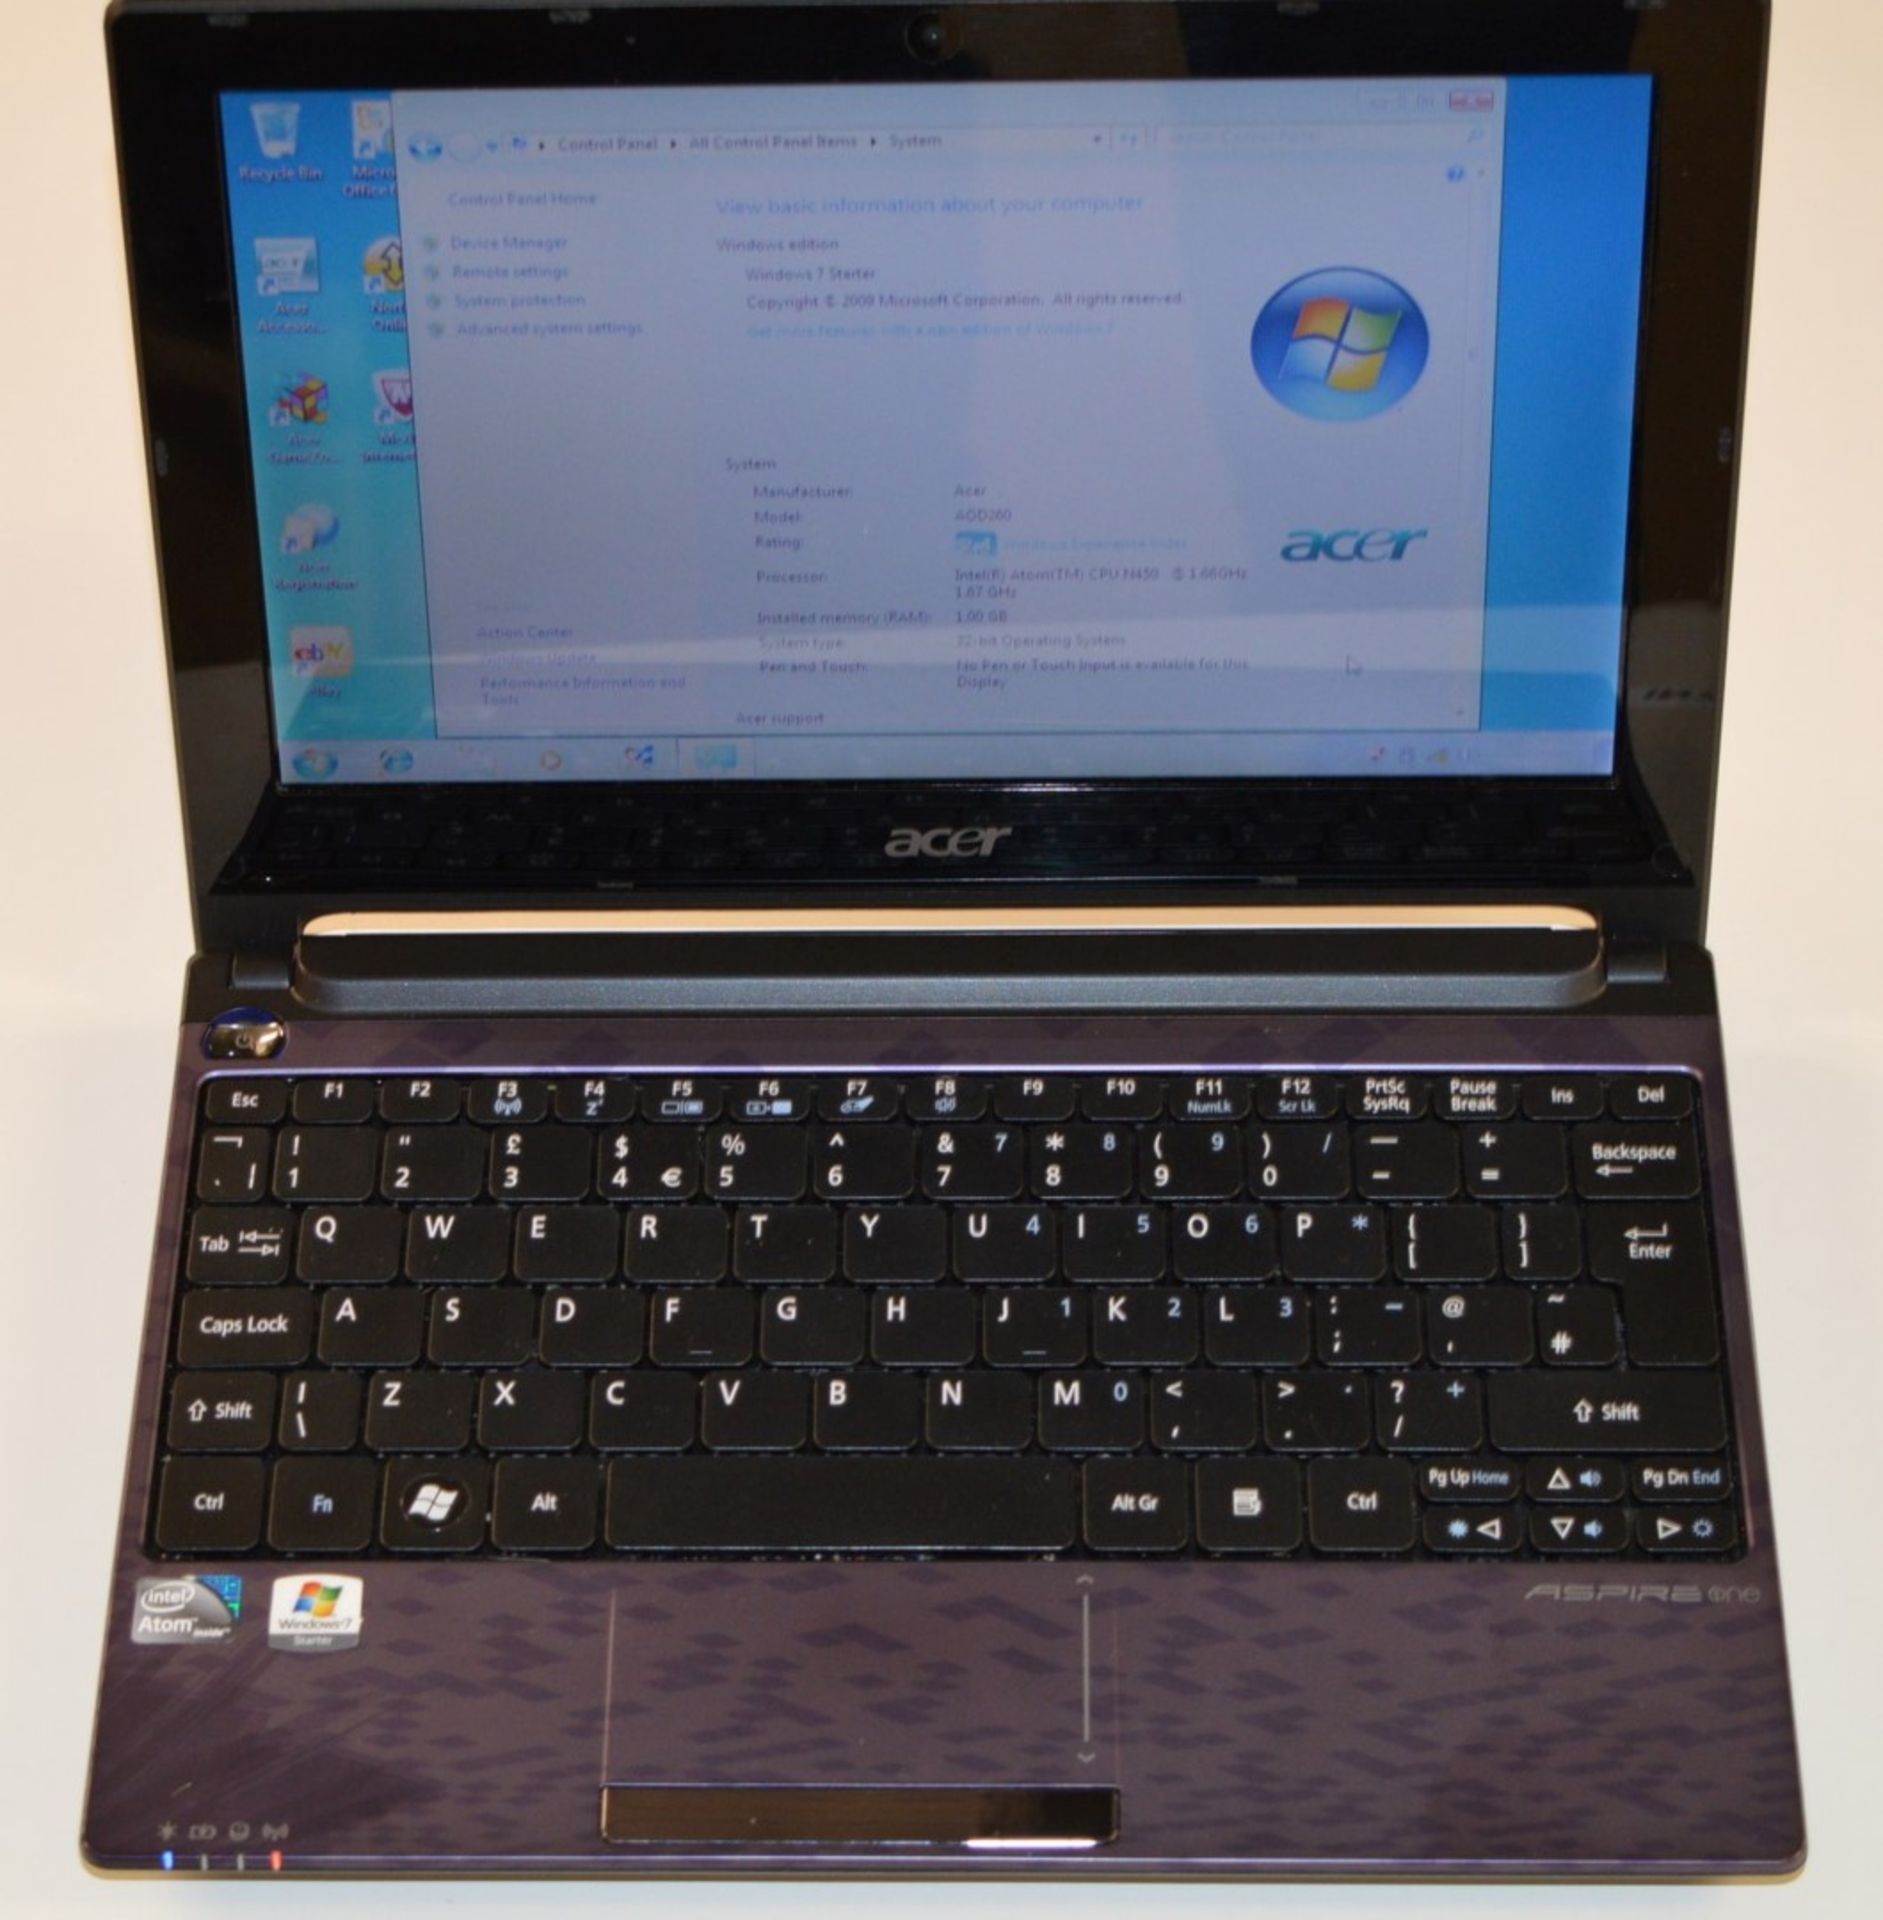 1 x Acer Aspire One Netbook Computer - Features 10 Inch Screen, 250gb Hard Drive, 1gb Ram, Intel 1. - Image 6 of 13